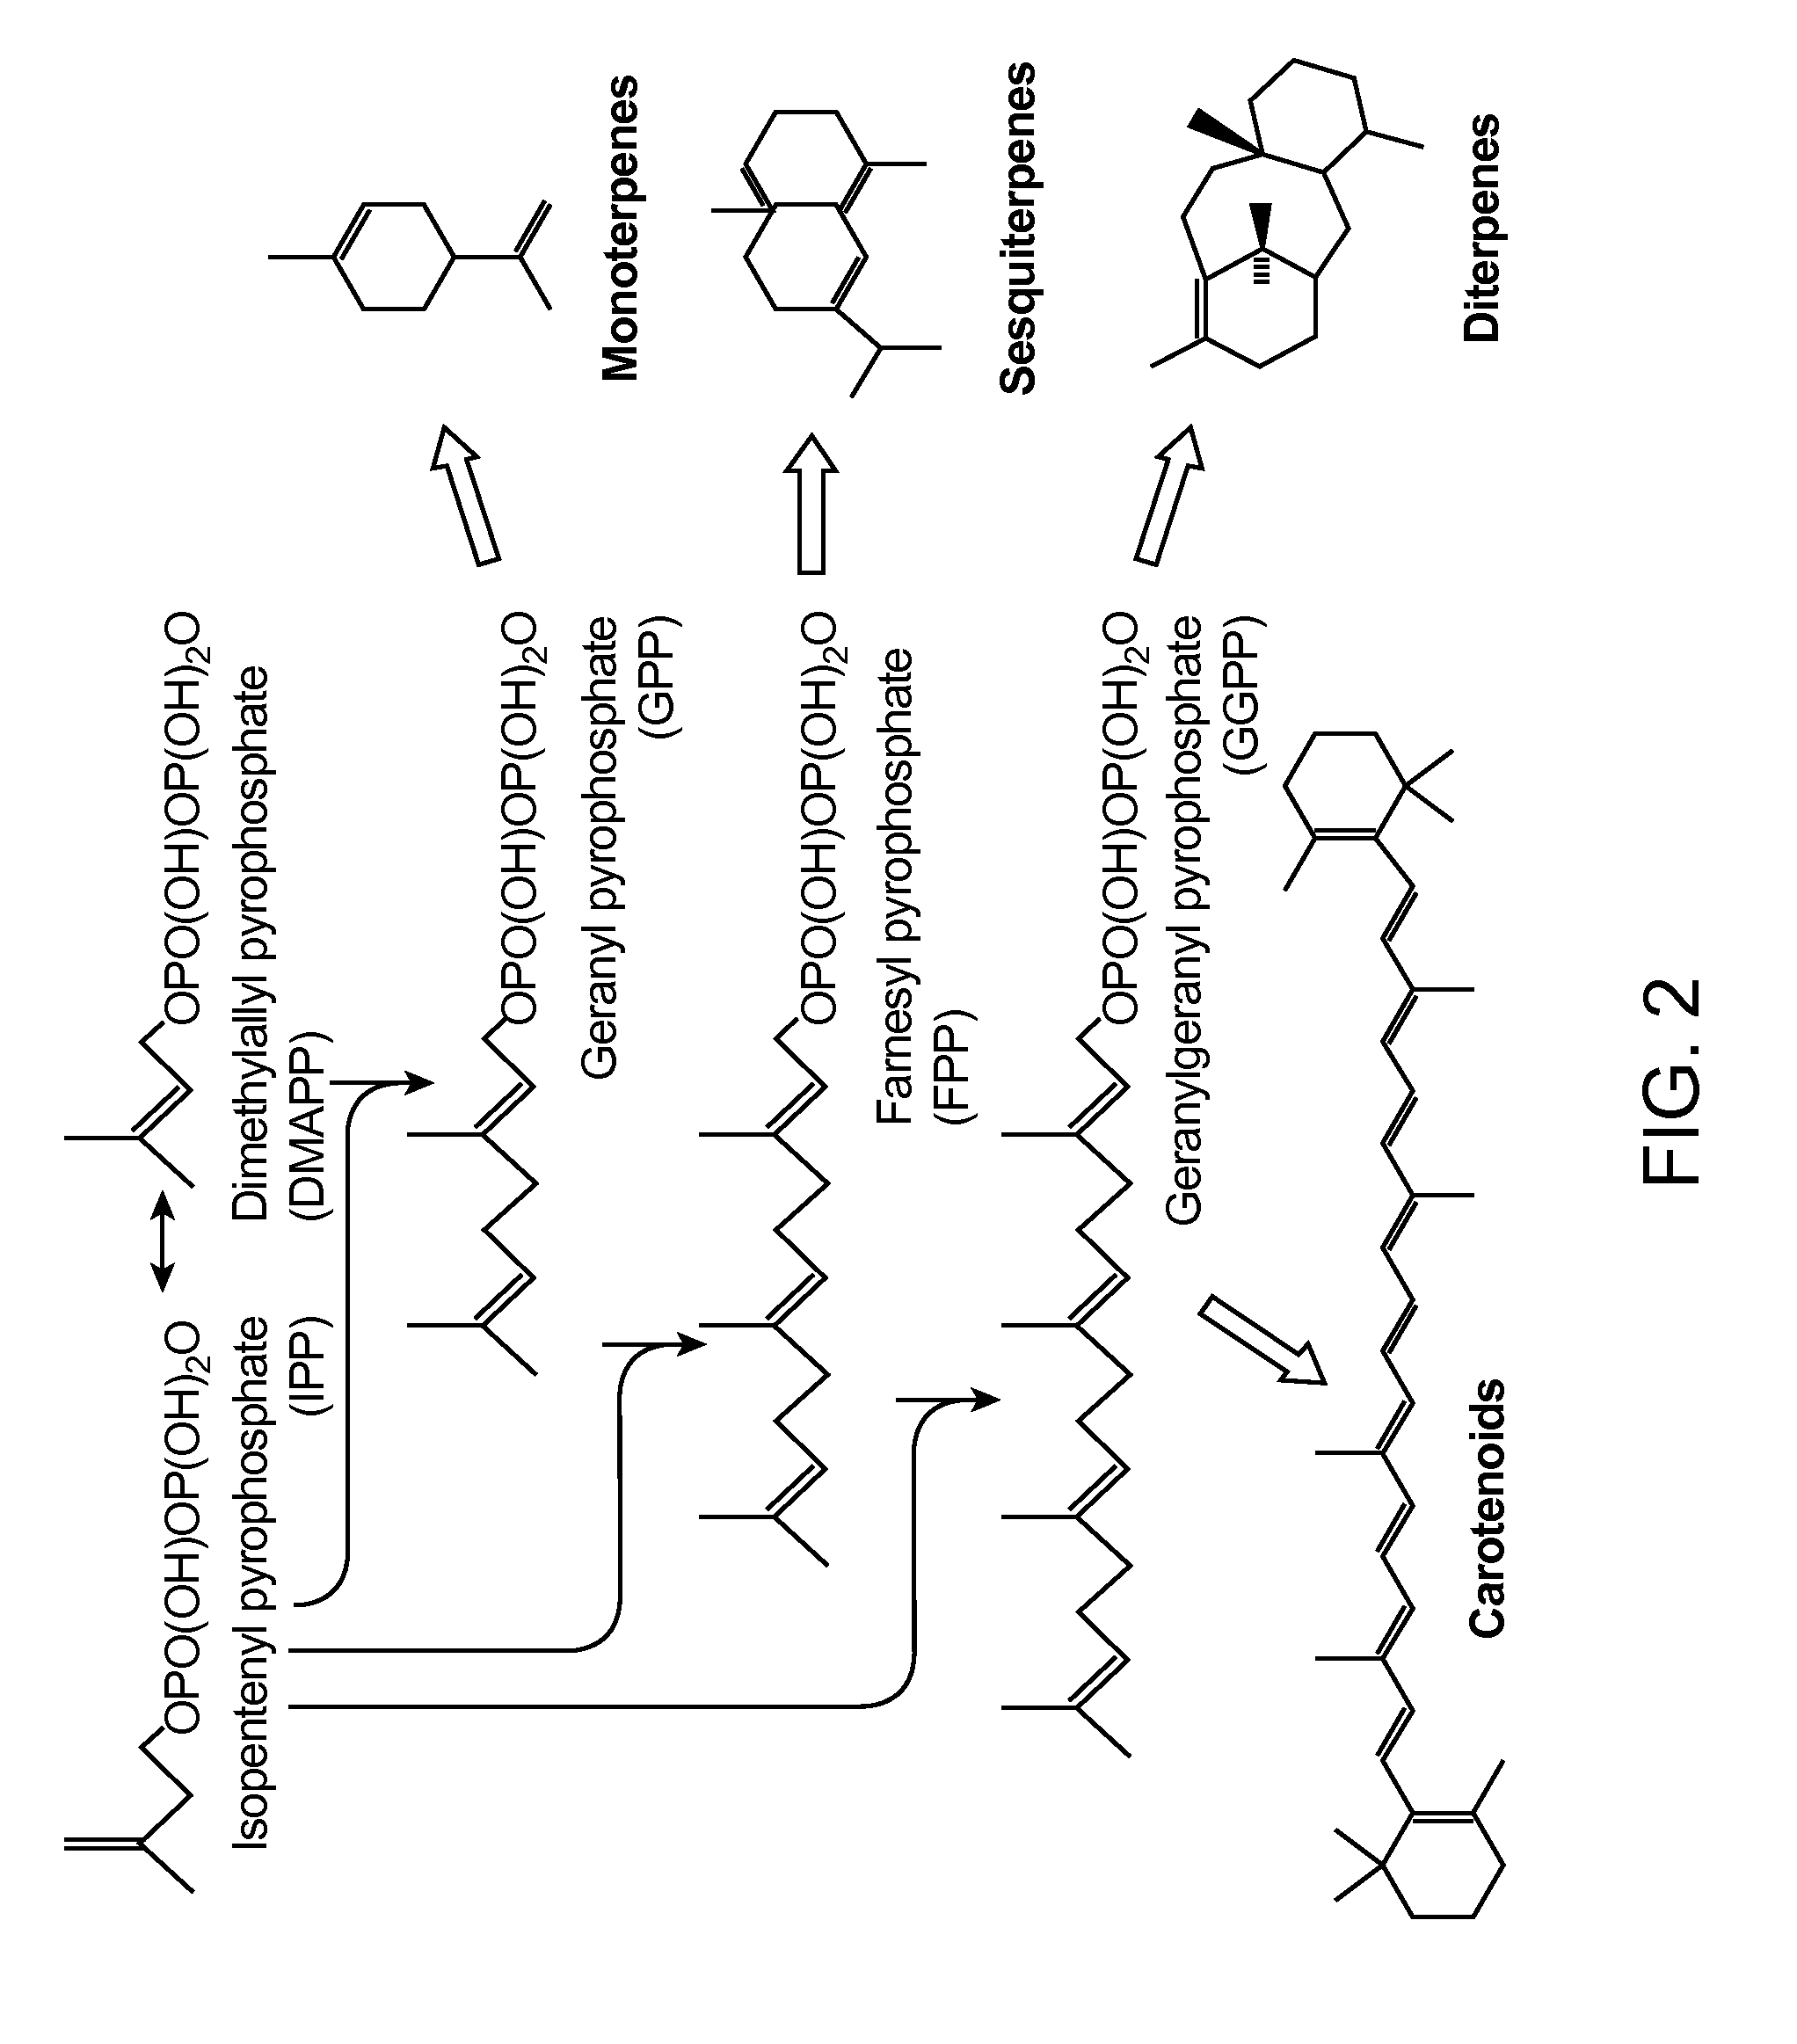 Production of acetyl-coenzyme a derived isoprenoids